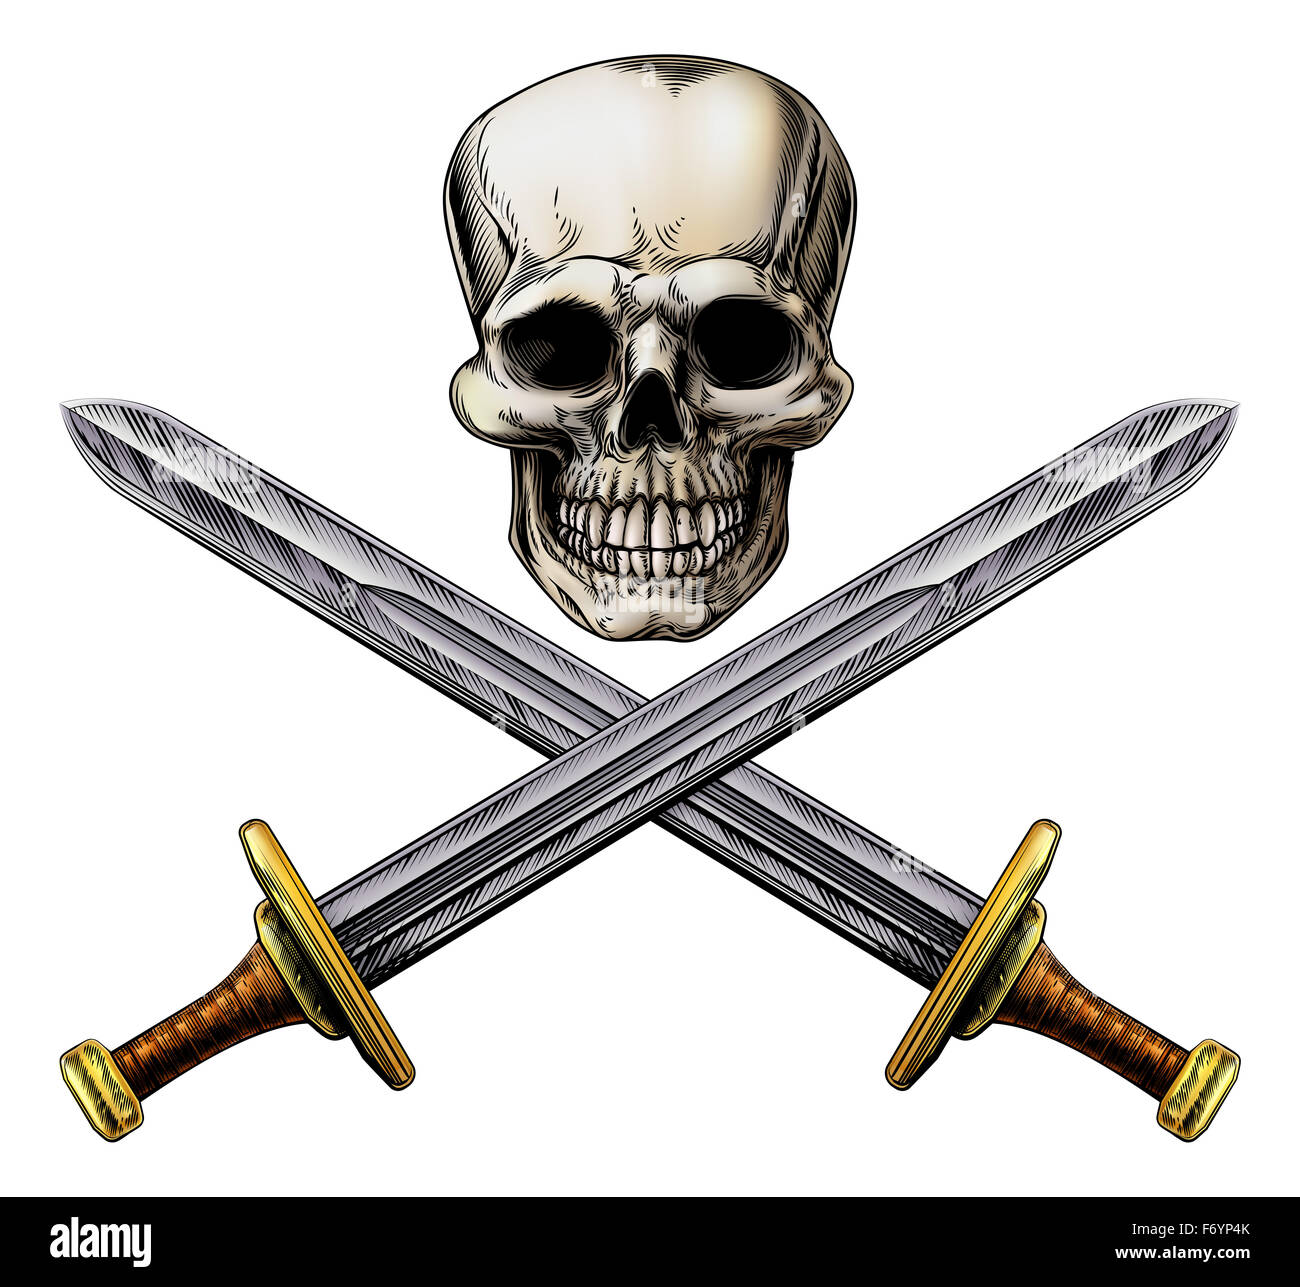 A human skull and crossed swords pirate style sign in a woodblock style Stock Photo